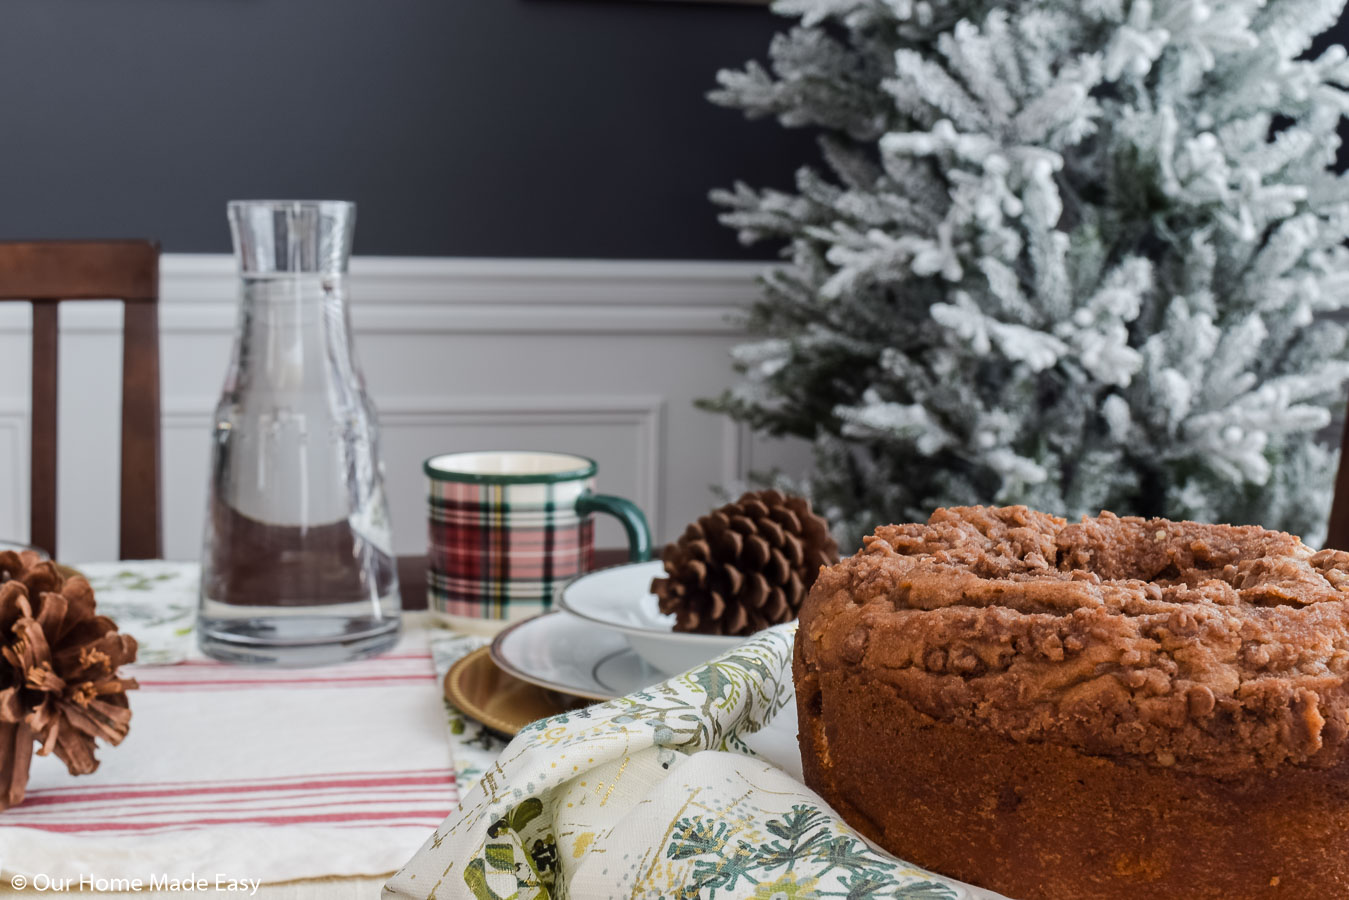 A dining room table set for Christmas morning breakfast with an coffee crumb cake